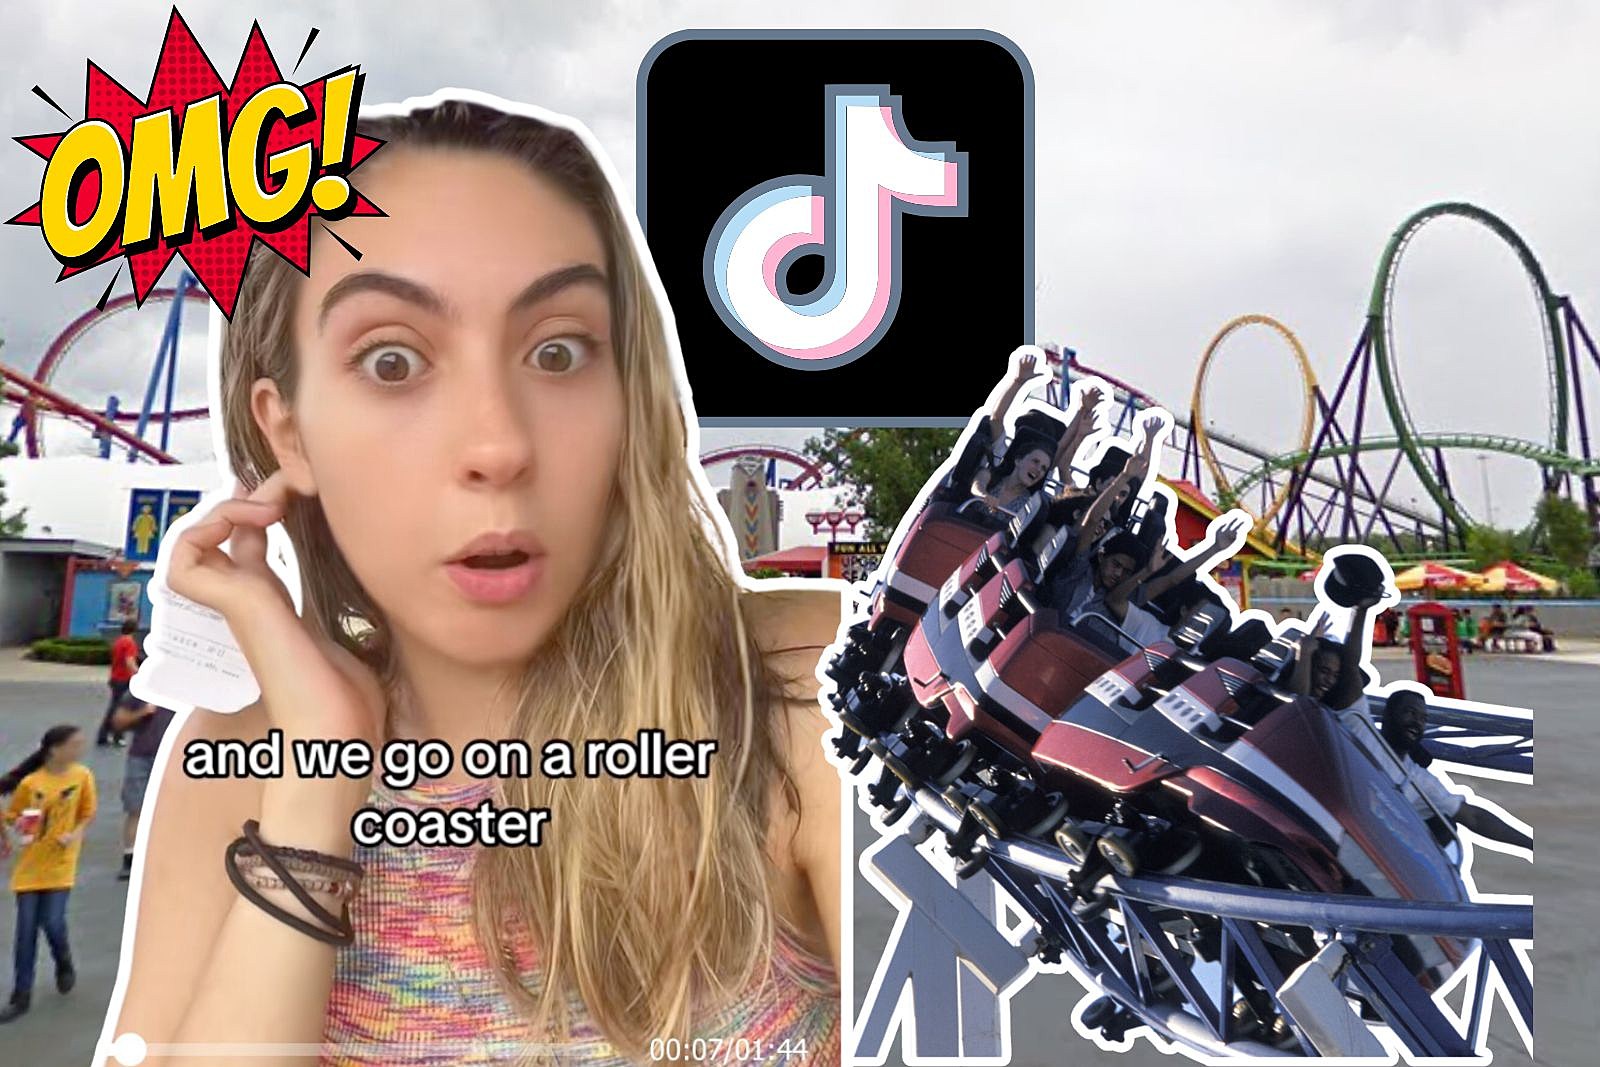 TikToker Claims Dangerous Roller Coaster Experience at Six Flags